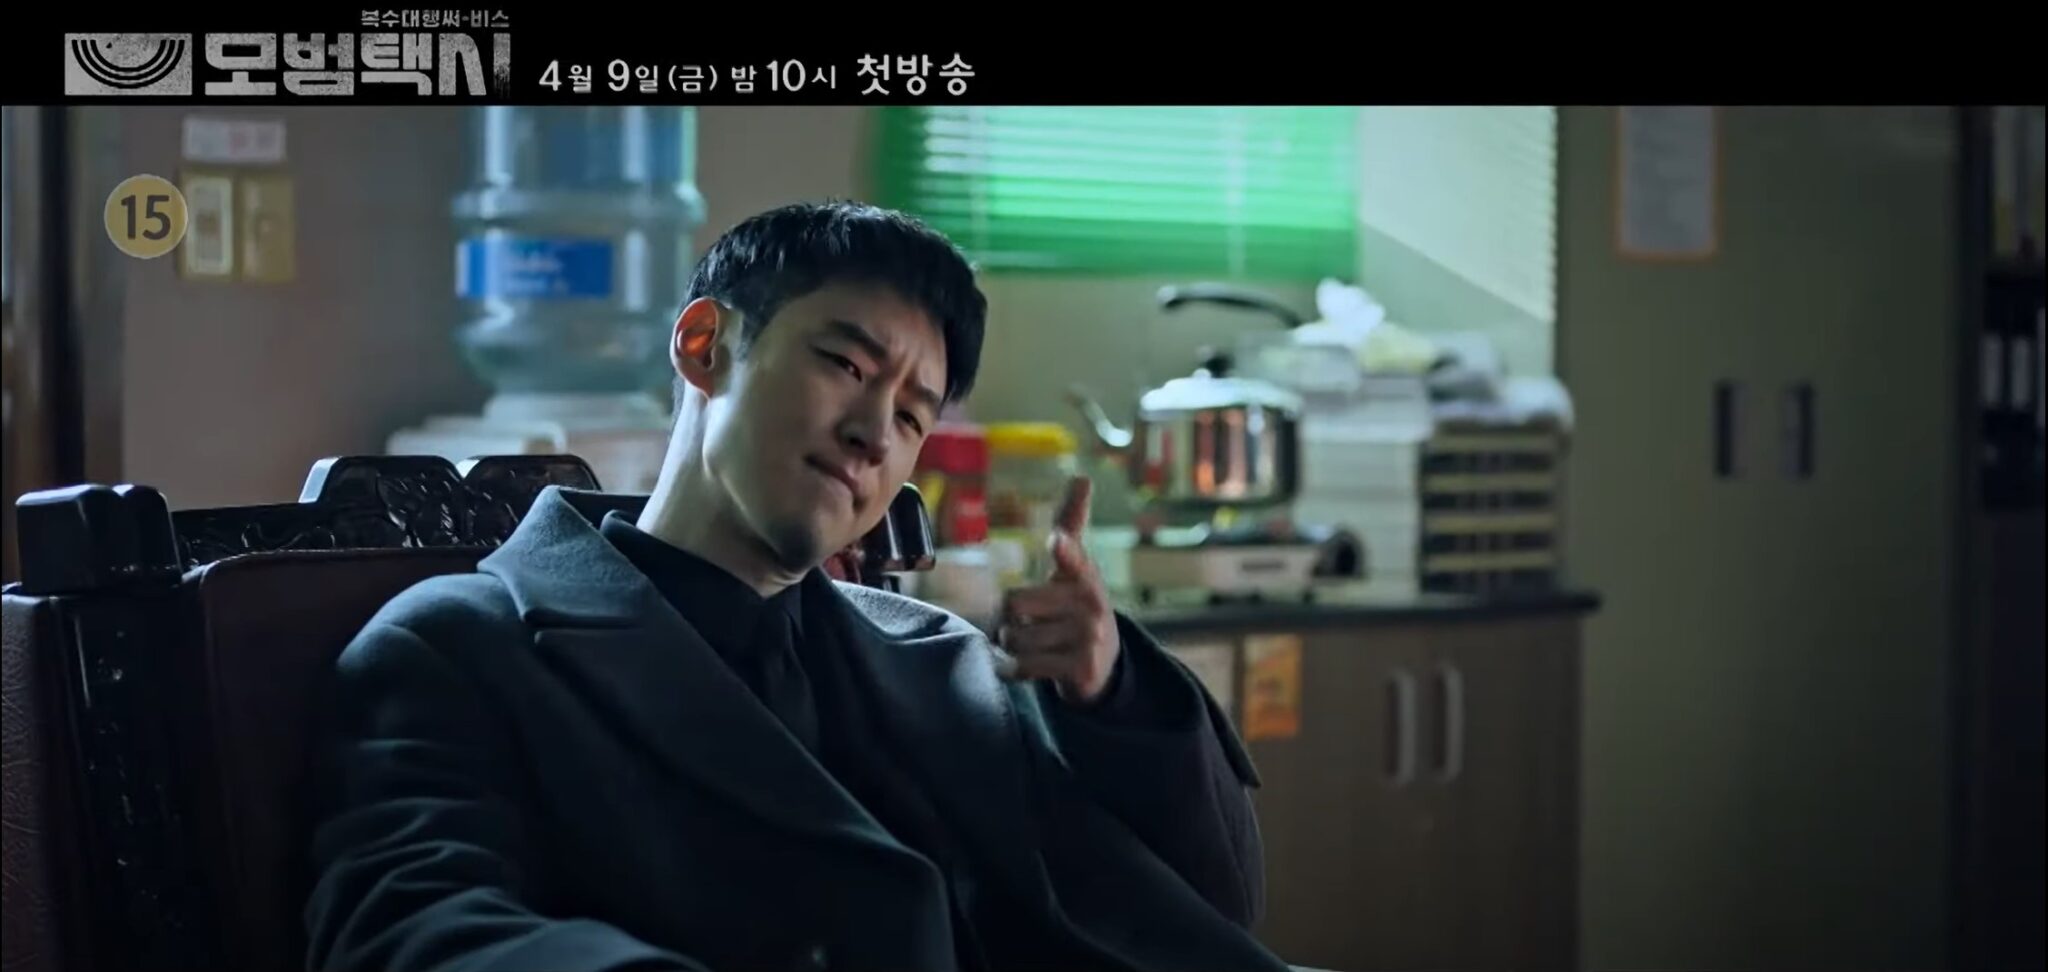 Taxi Driver Serves Vigilante Justice In New Teaser With Lee Je Hoon Kim Eui Sung And Esom 4837